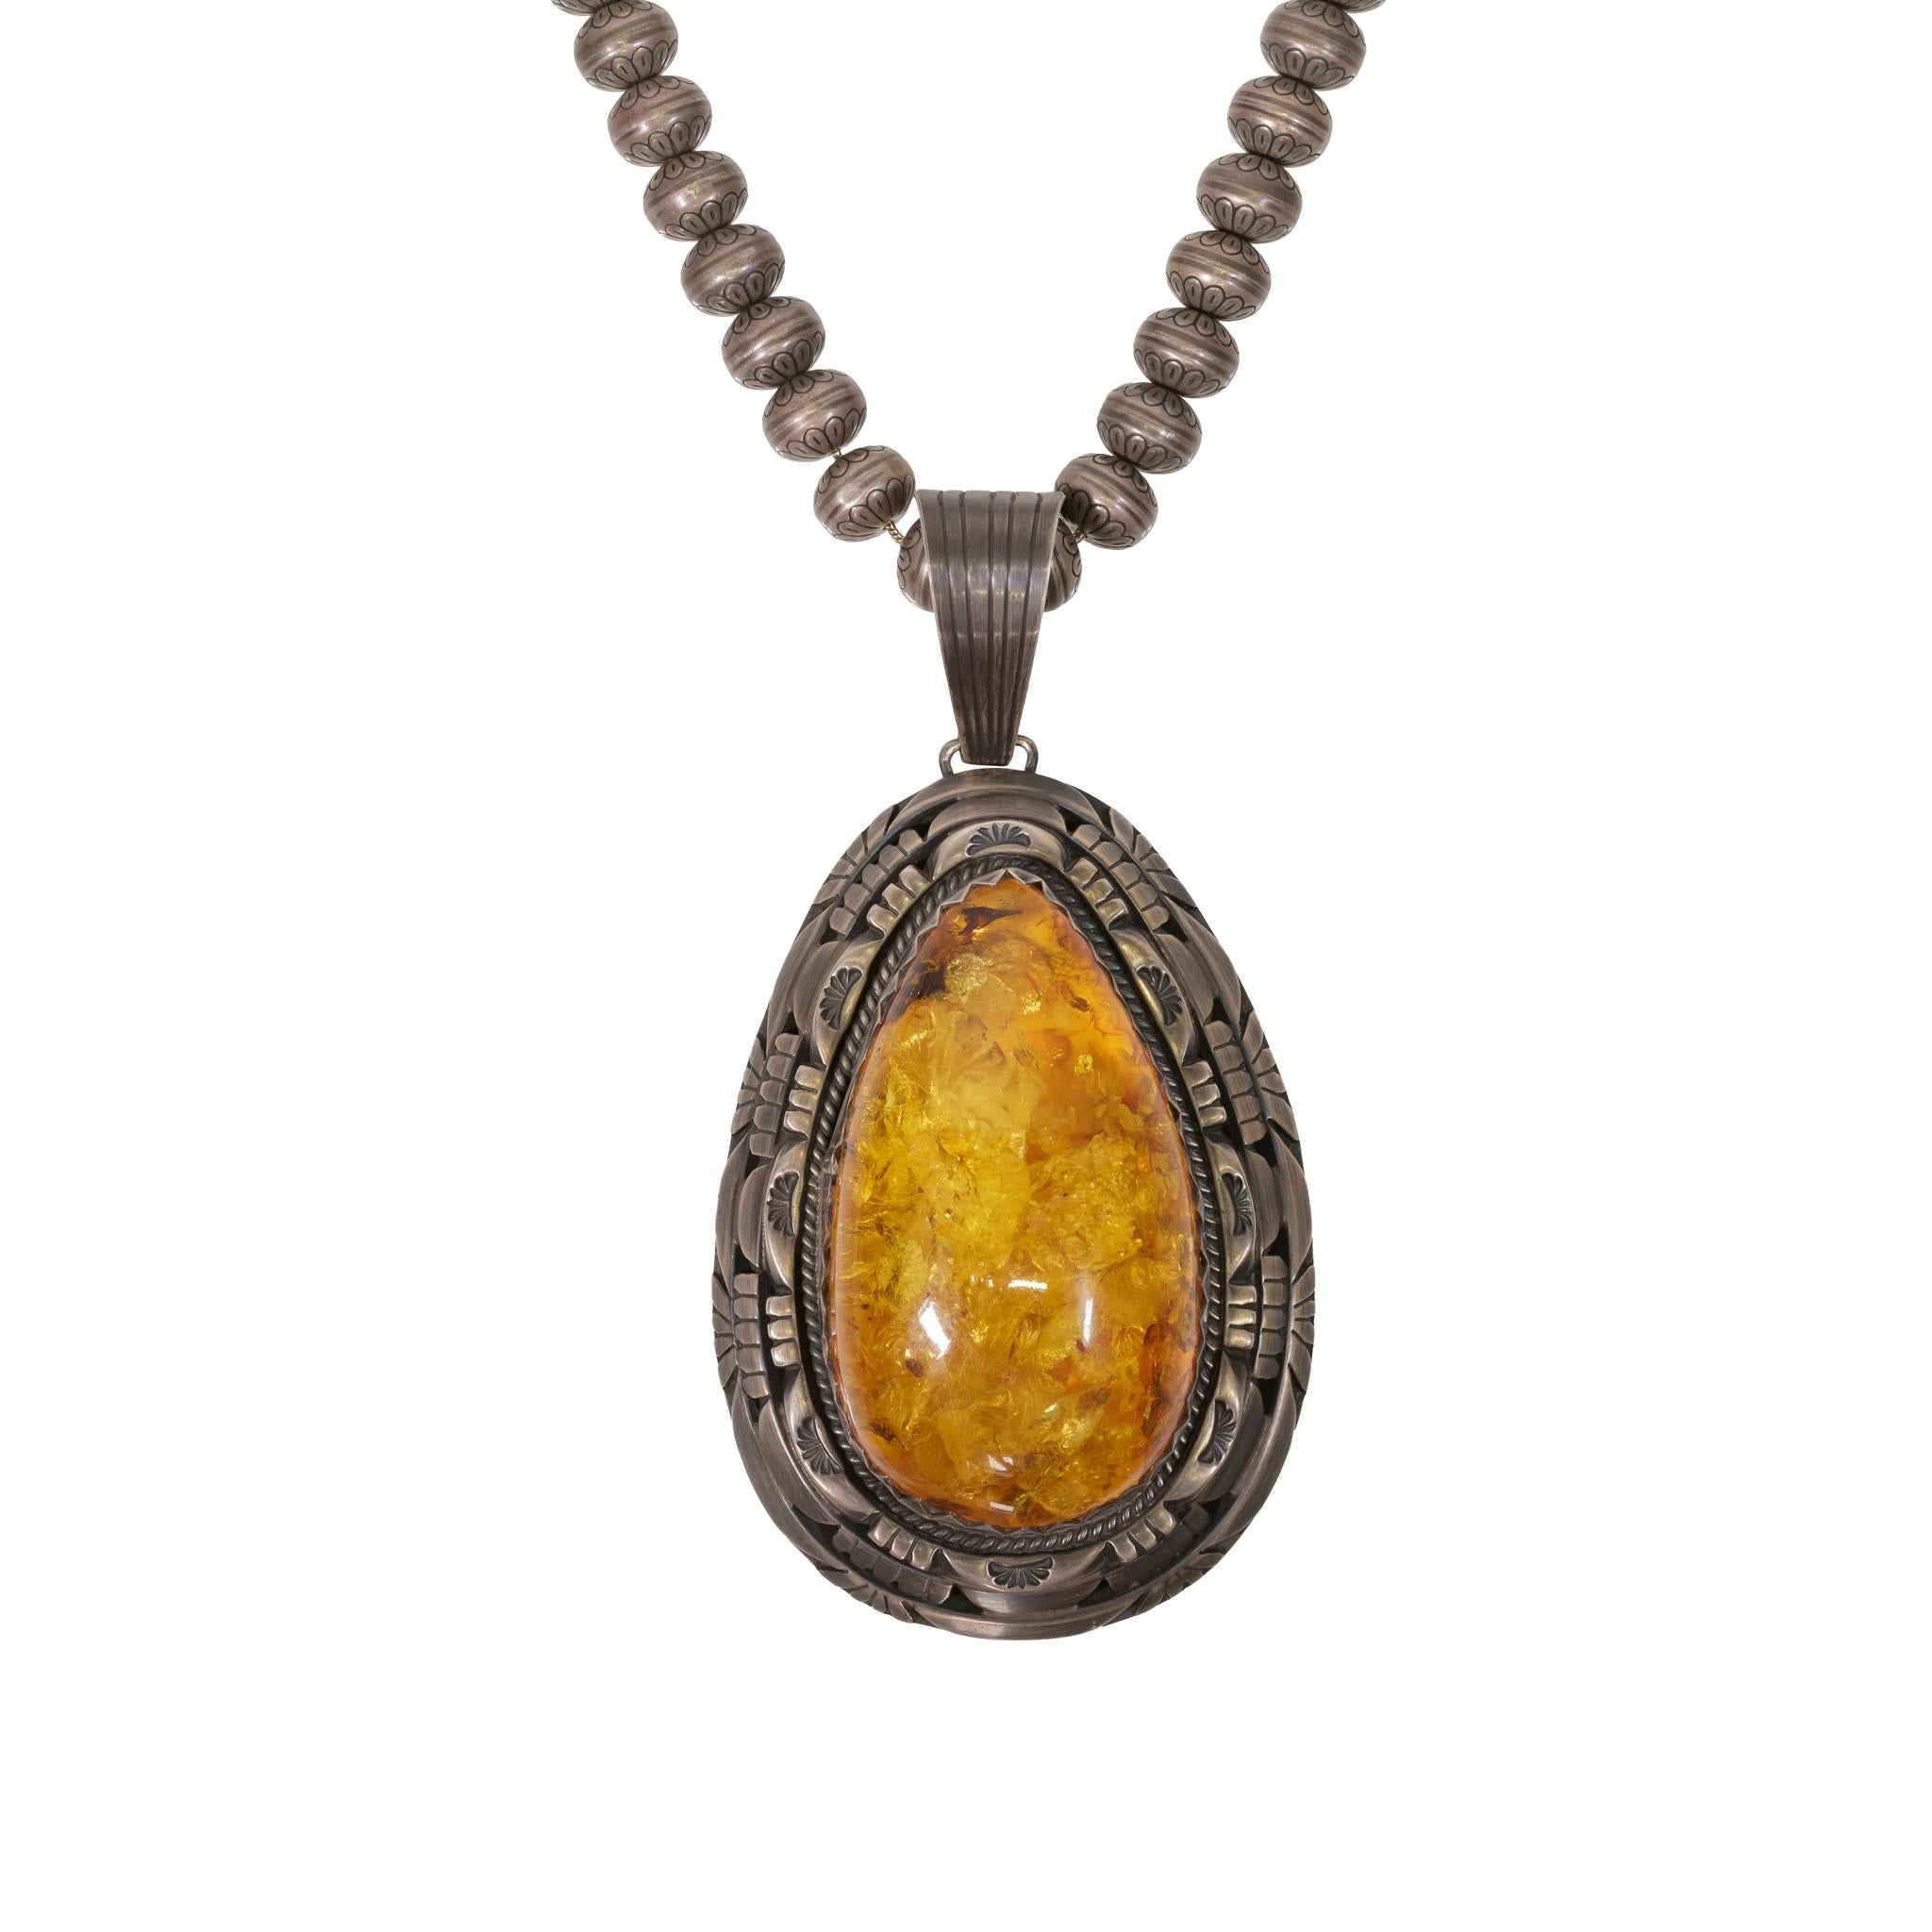 Solid amber pendant necklace. Marked Sterling, signed Charles Johnson. Stunning giant amber, beautiful antique chain, lightweight for the size. Chain is detailed with hand stamped decorated beads.

PERIOD: After 1950

ORIGIN: Navajo,